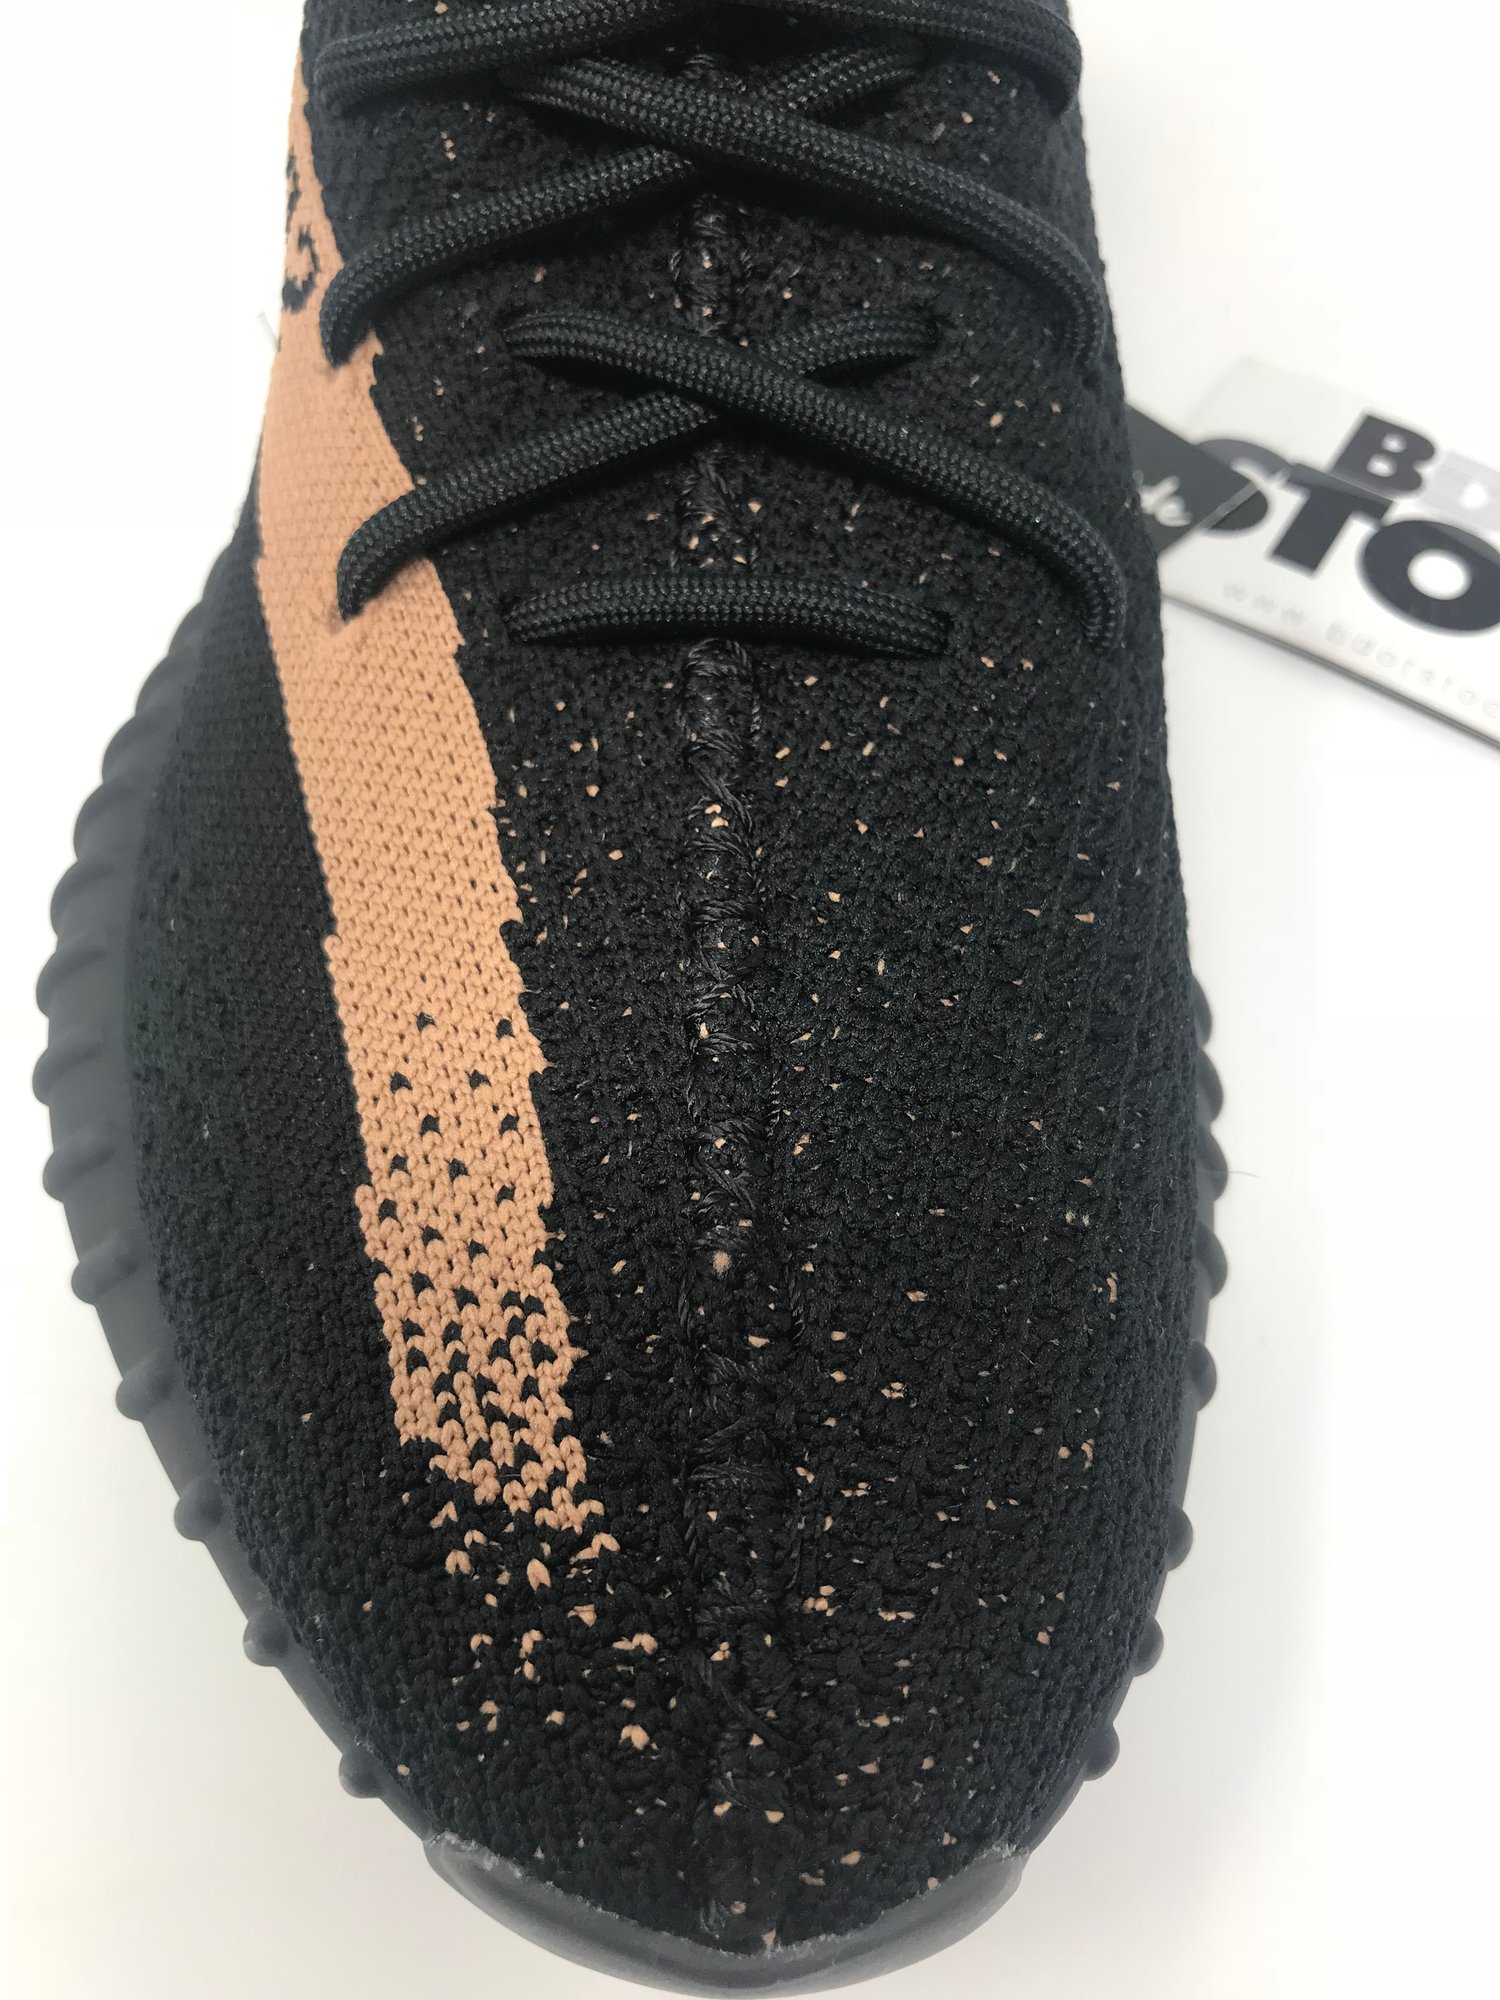 Image of Adidas Yeezy Boost 350 V2 "Copper" SZ 10.5